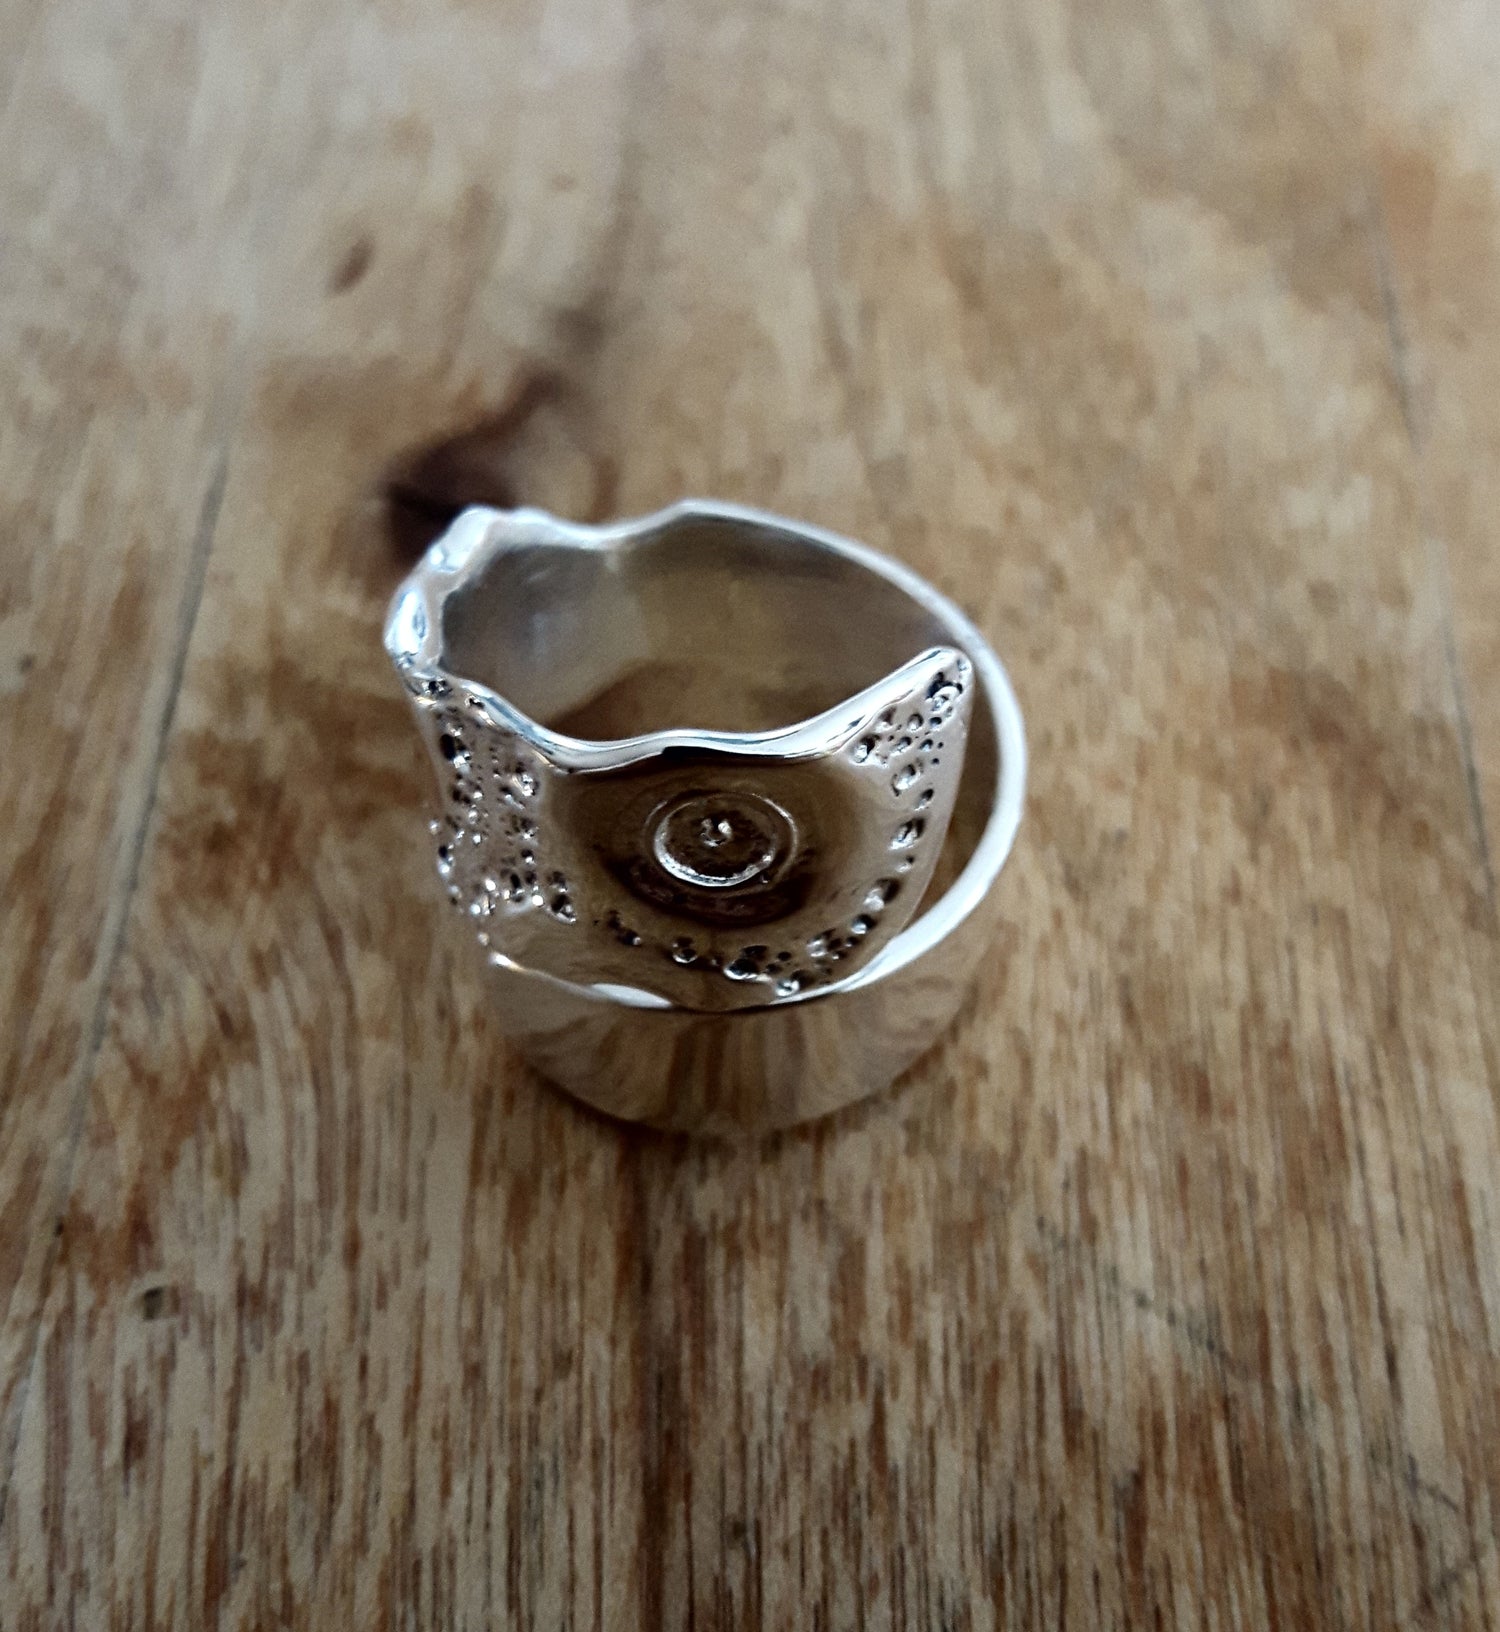 OFFSET SEA CHESTNUT, ribbon-shaped ring with organic texture made from sea urchin shell